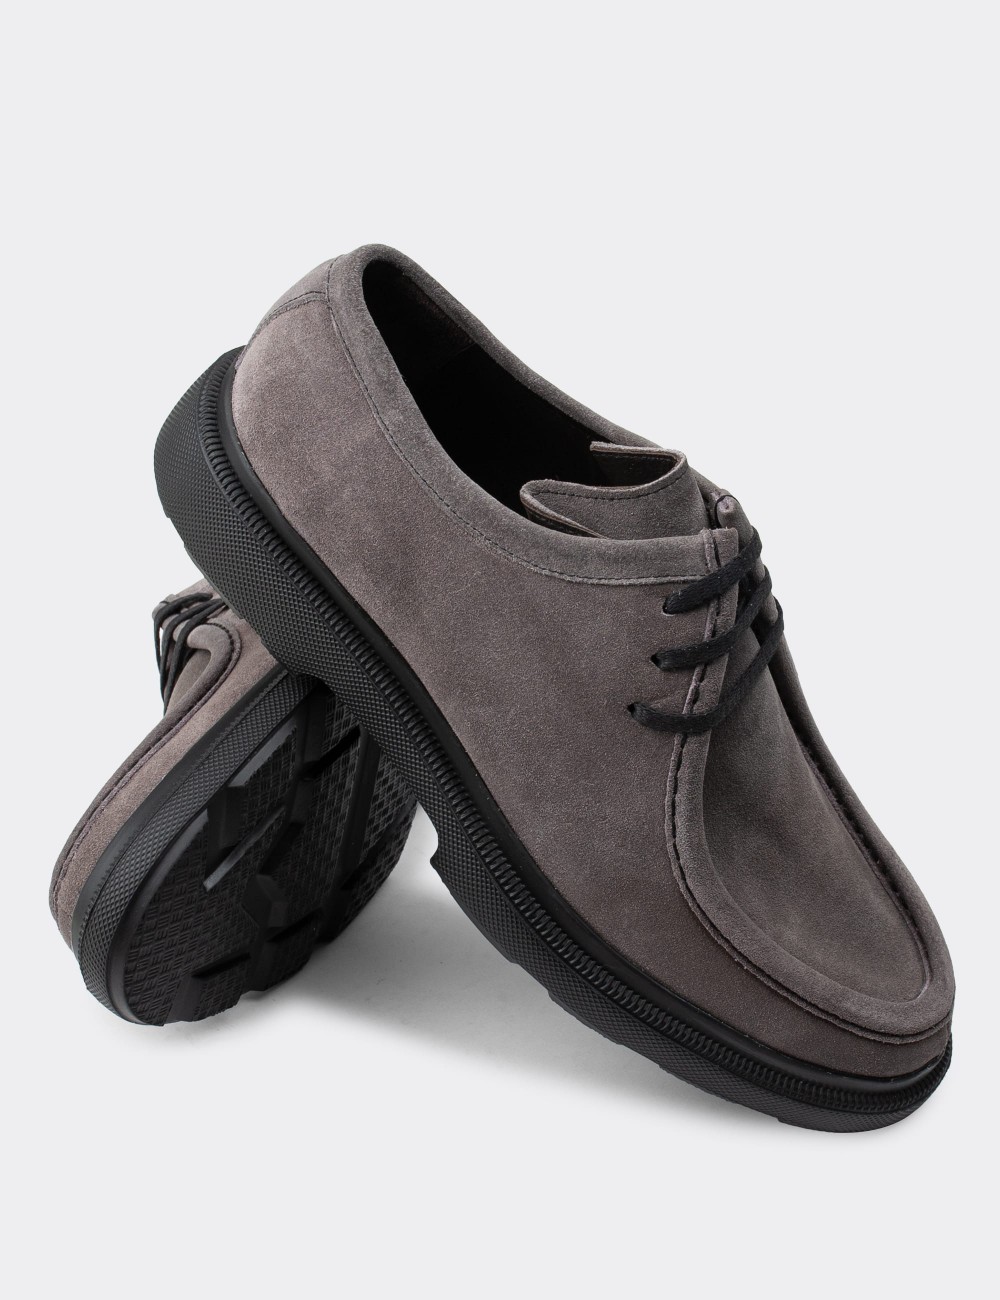 Gray Suede Leather Lace-up Shoes - 01851MGRIP01